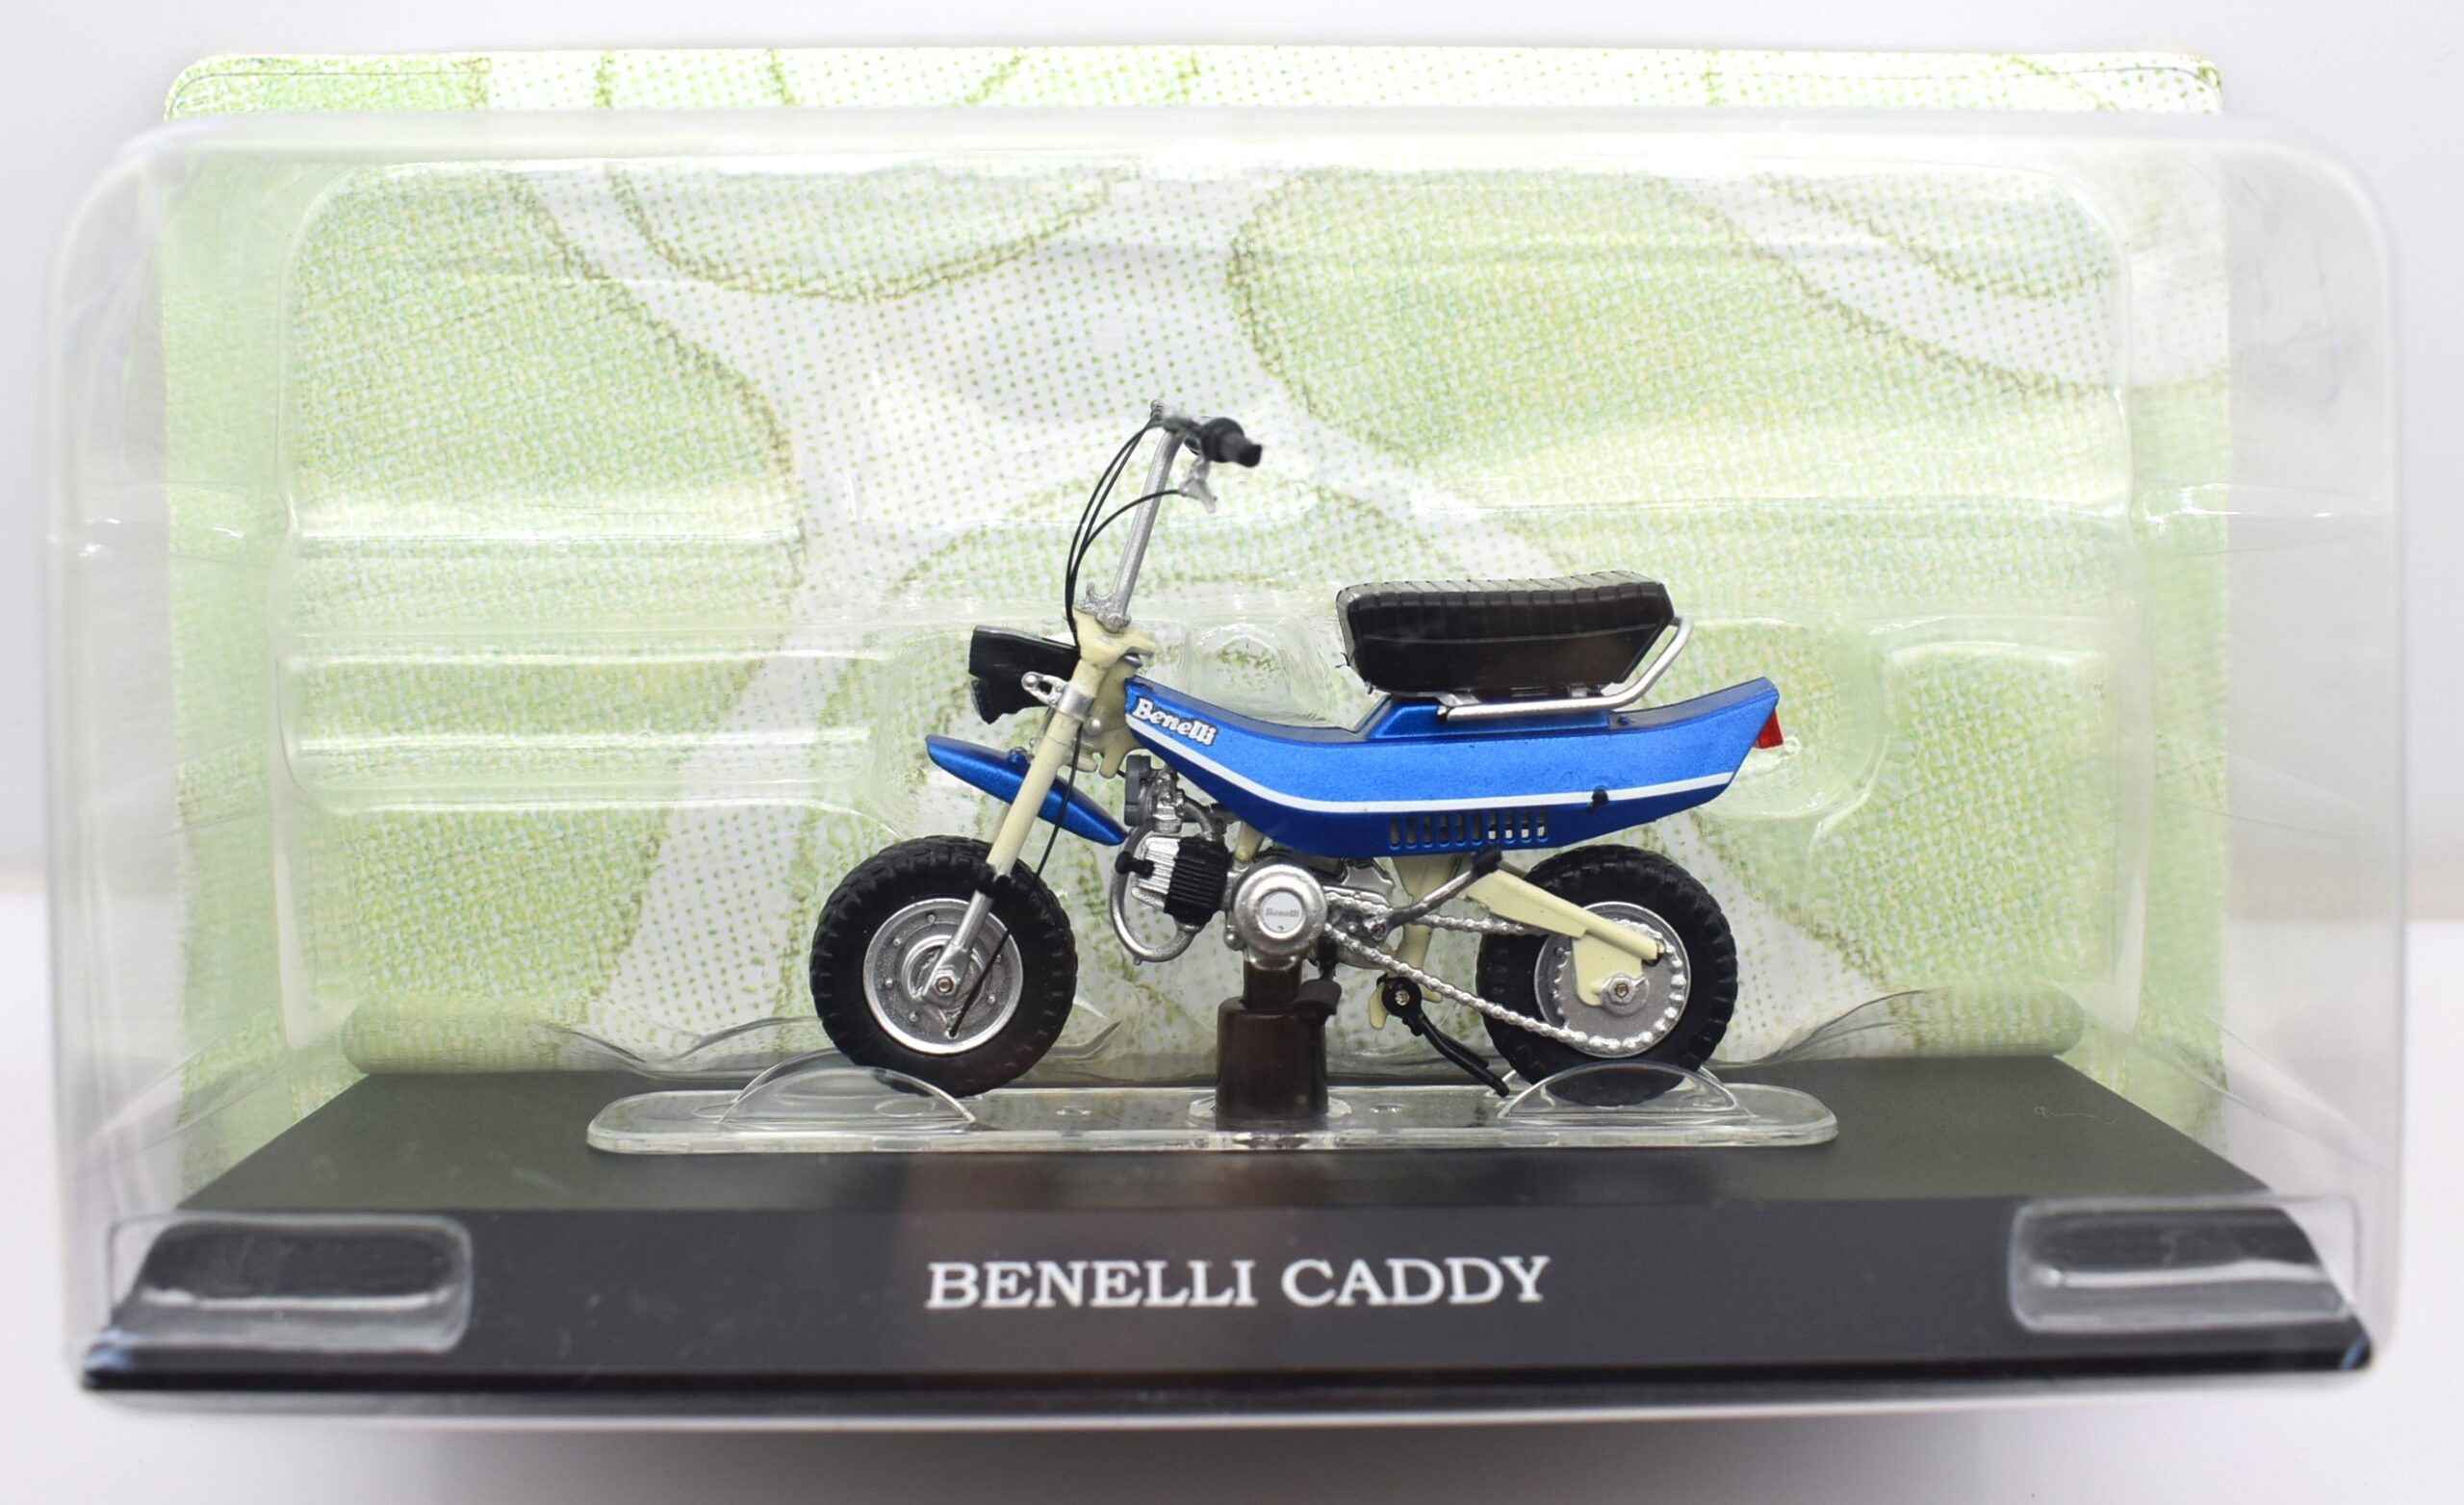 1:18 scale moped motorcyclecollection Benelli Caddy scootervehicles